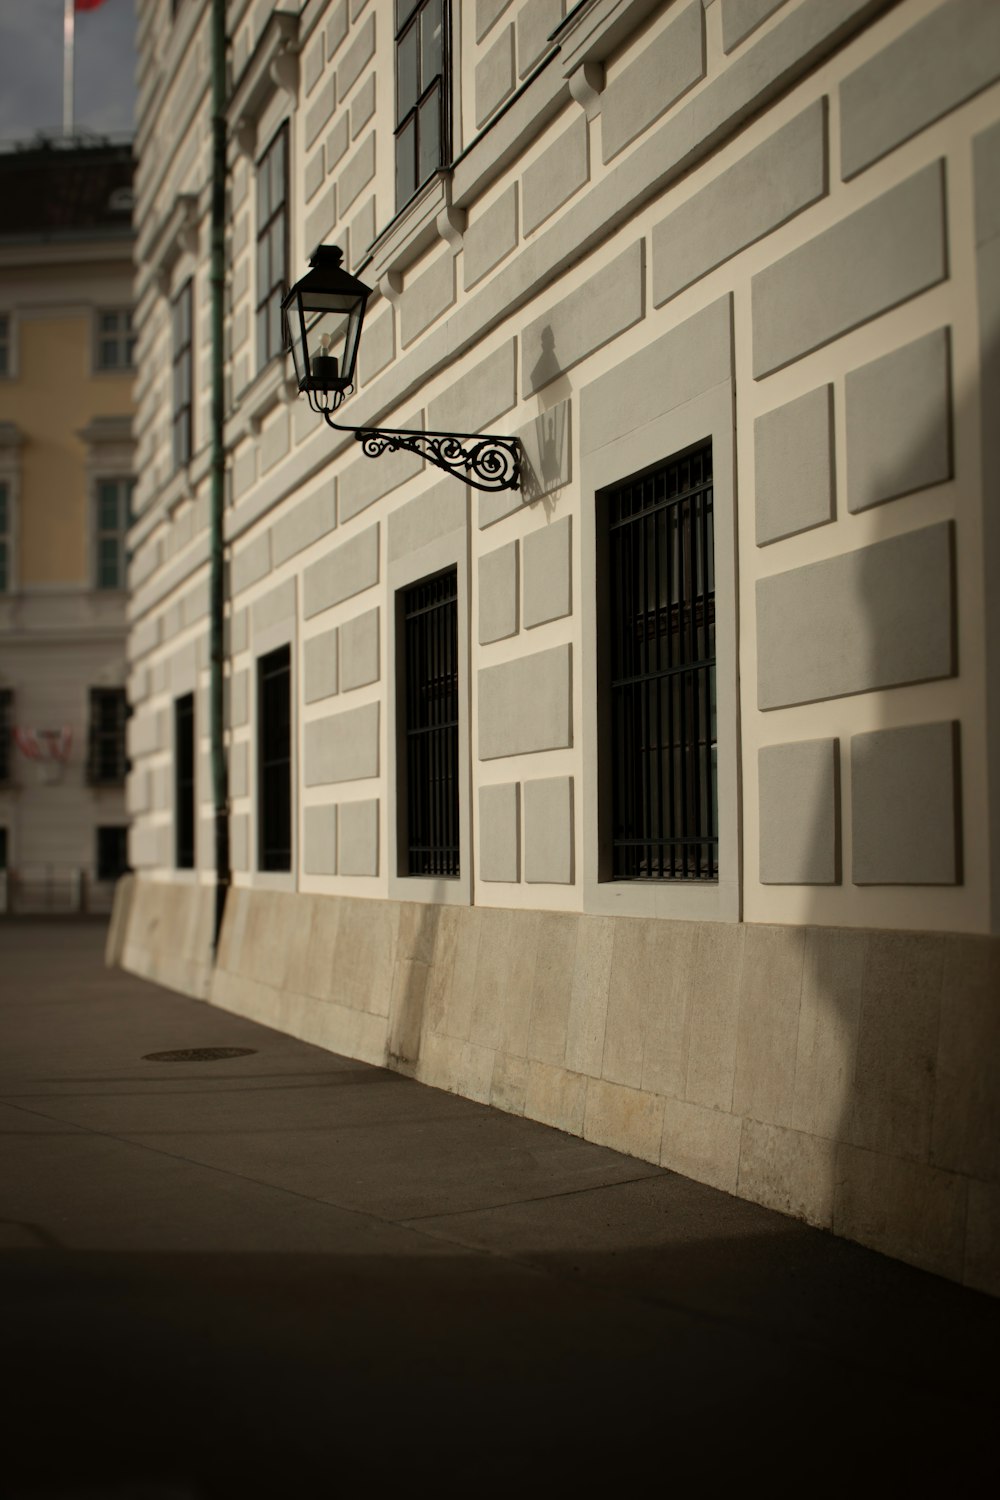 a street light on the side of a building